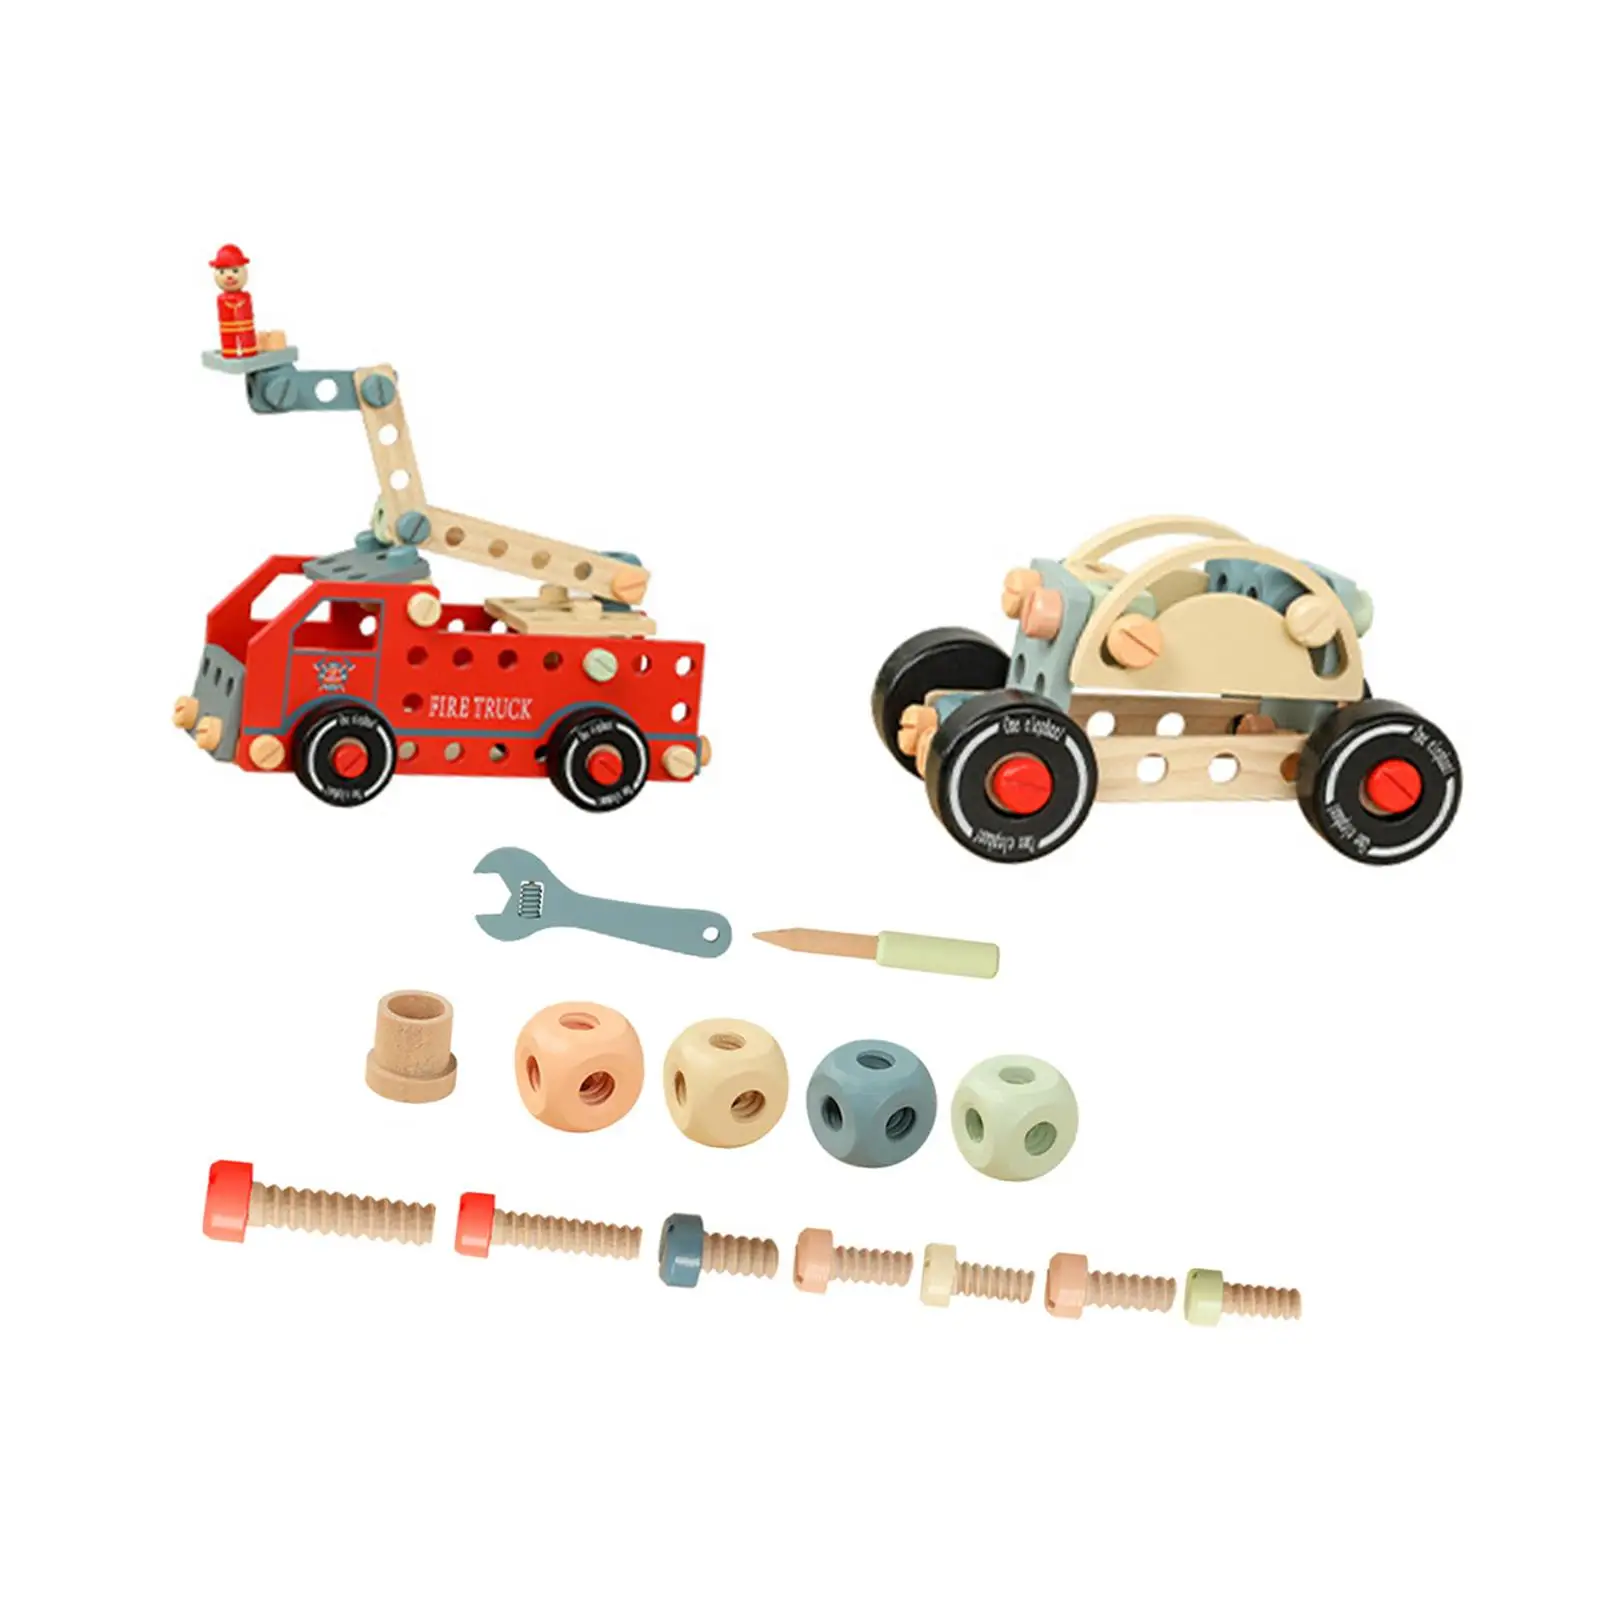 Wooden Tool Set Construction Building Toy for Education Activities Indoor